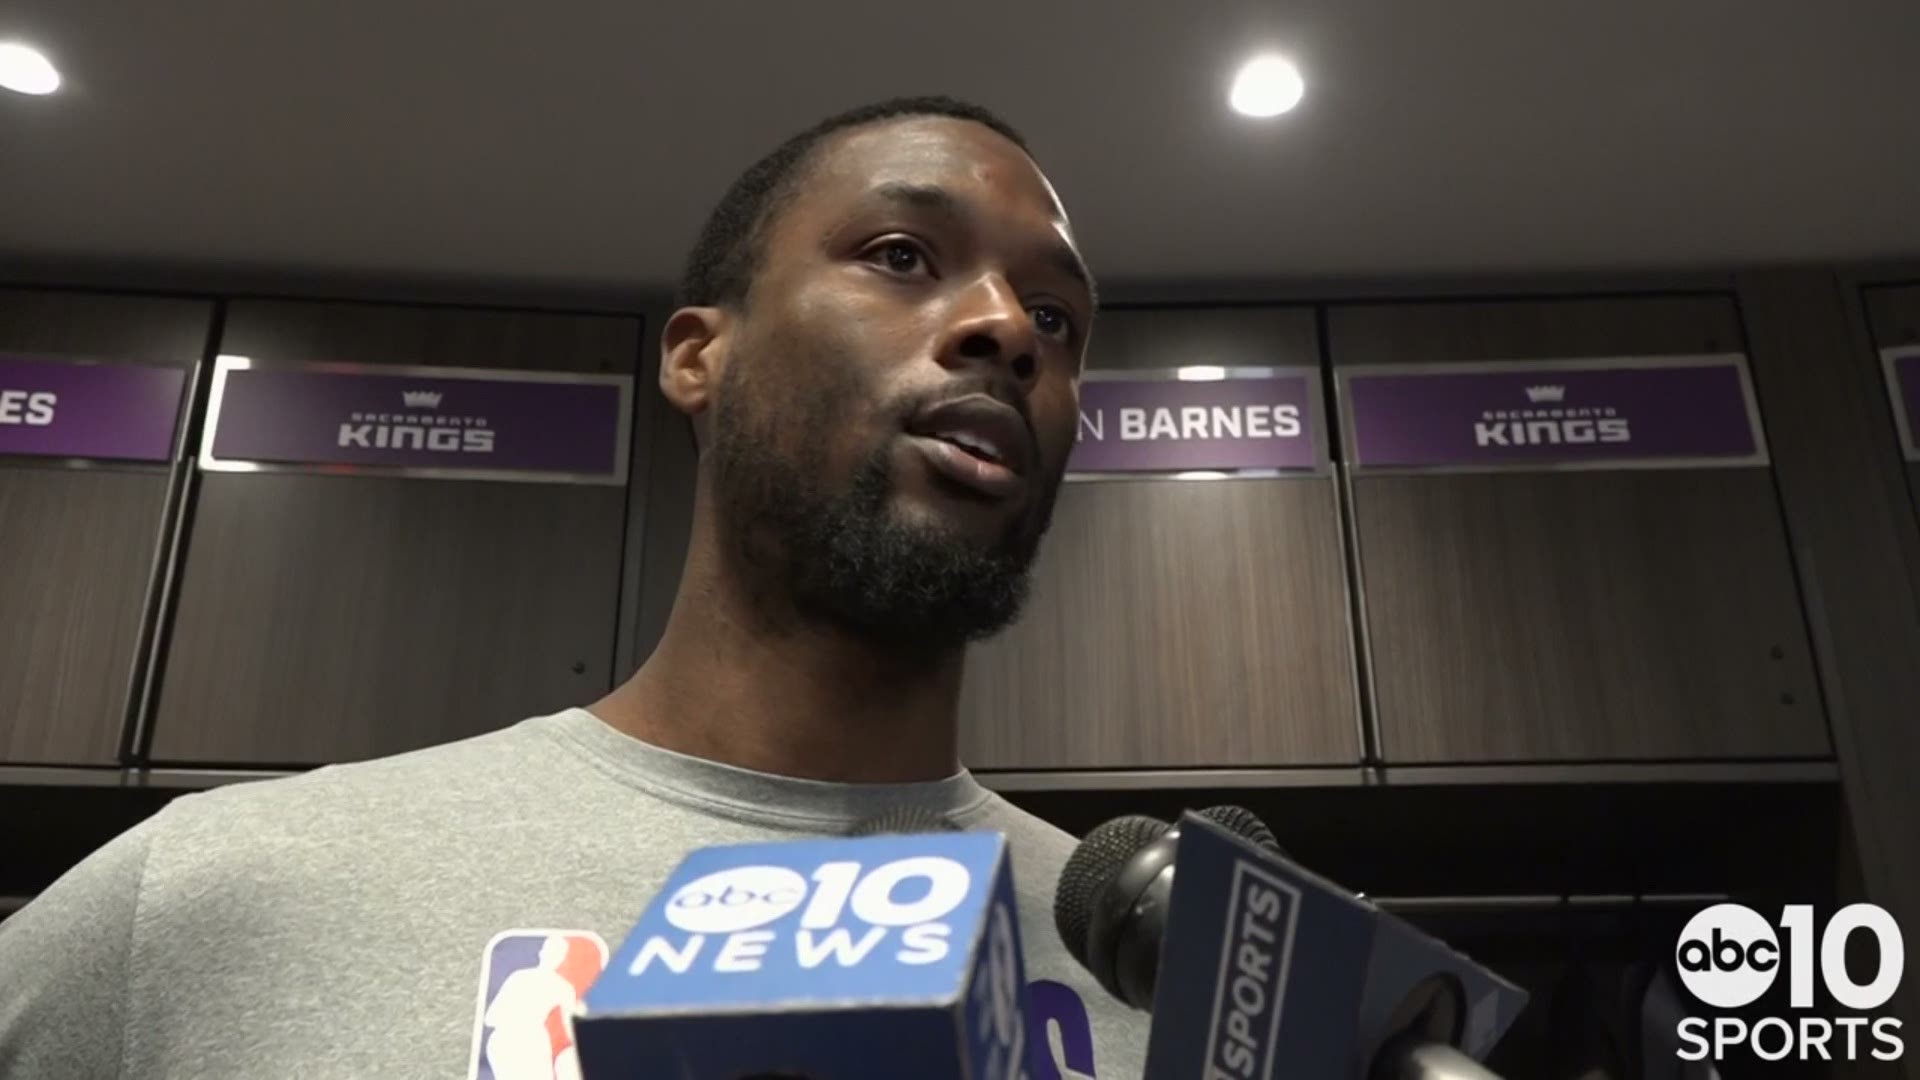 Kings forward Harrison Barnes talks about Saturday's 117-115 loss to the New Orleans Pelicans, and Sacramento committing 21 turnovers in the defeat.